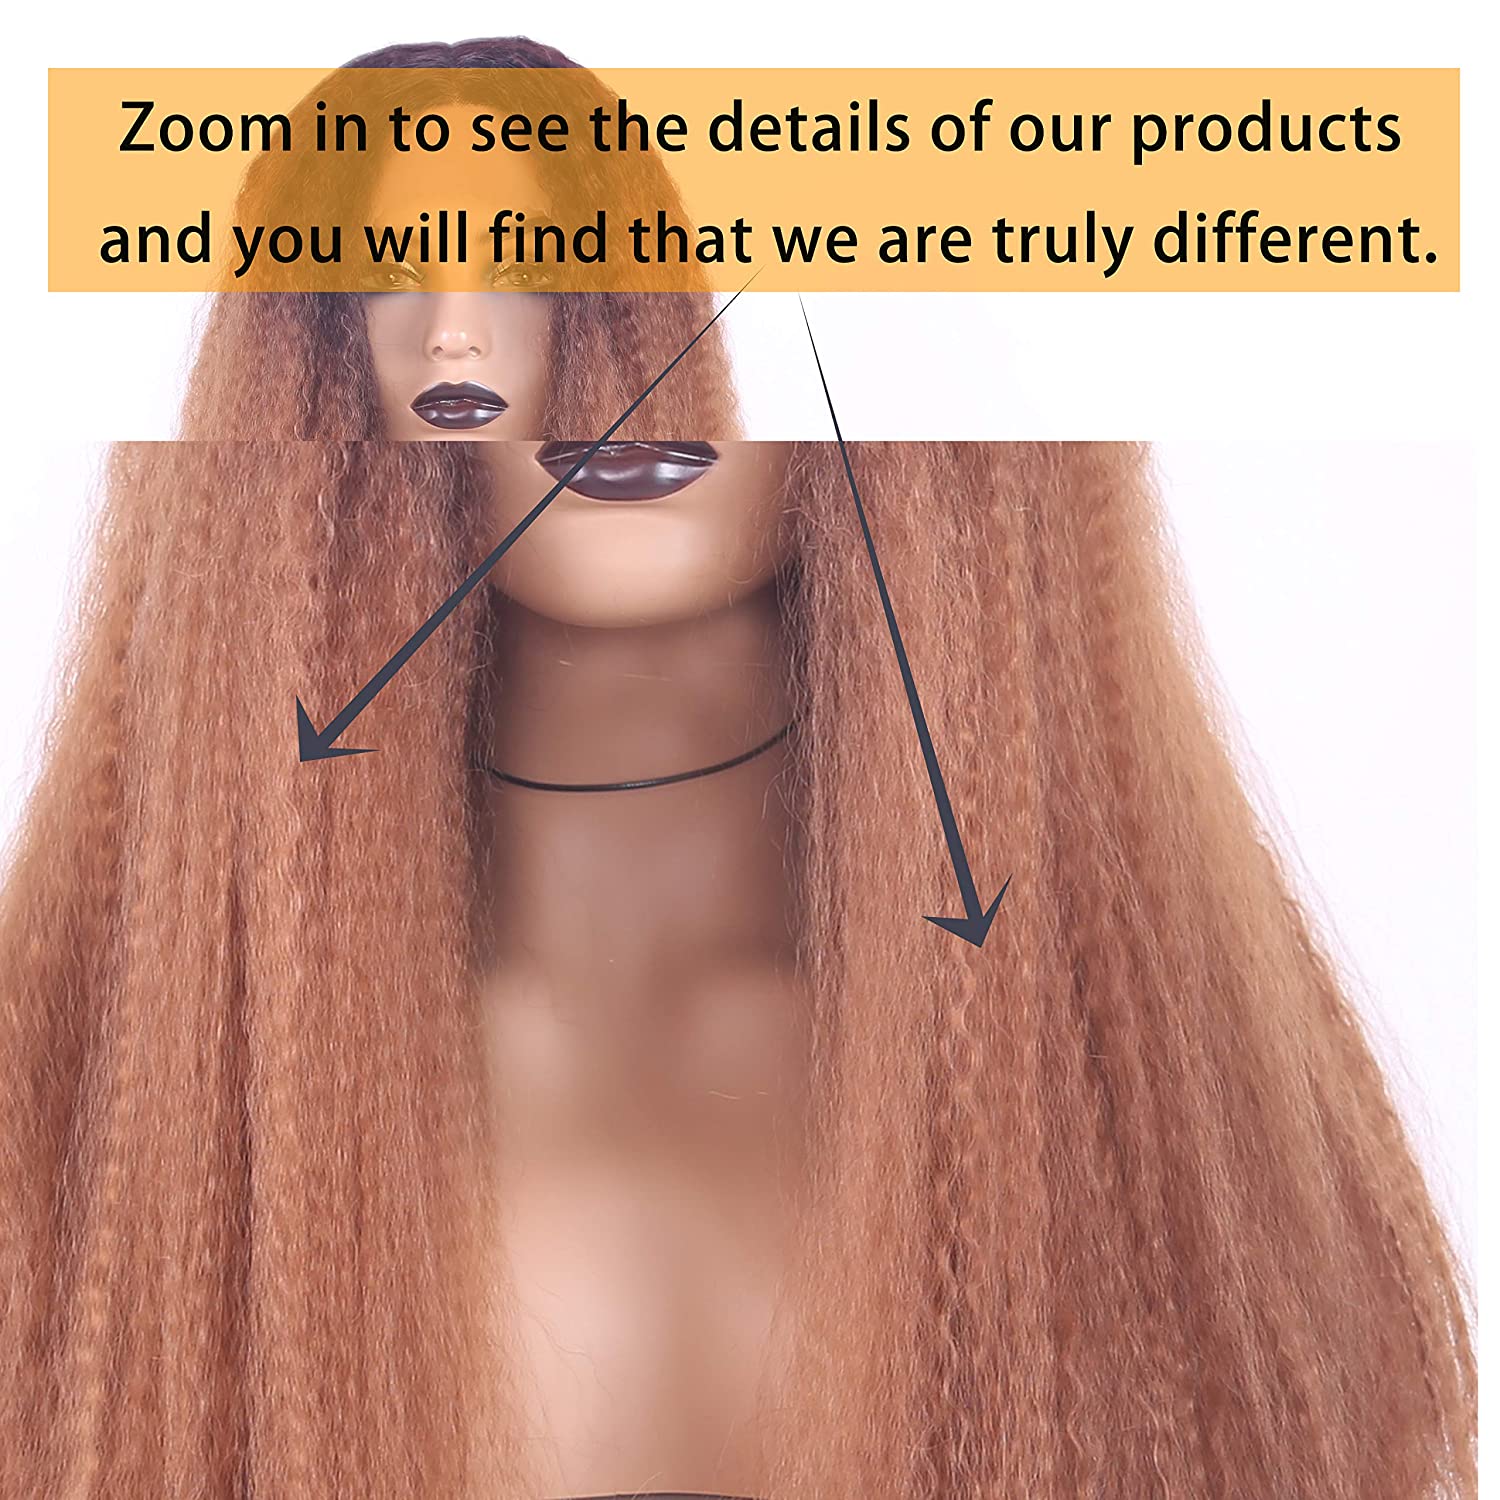 Long Kinky Straight Synthetic Lace Front Wigs For Women Ombre Brown Blonde Color Fluffy Hair Wig With Natural Hairline X-TRESS